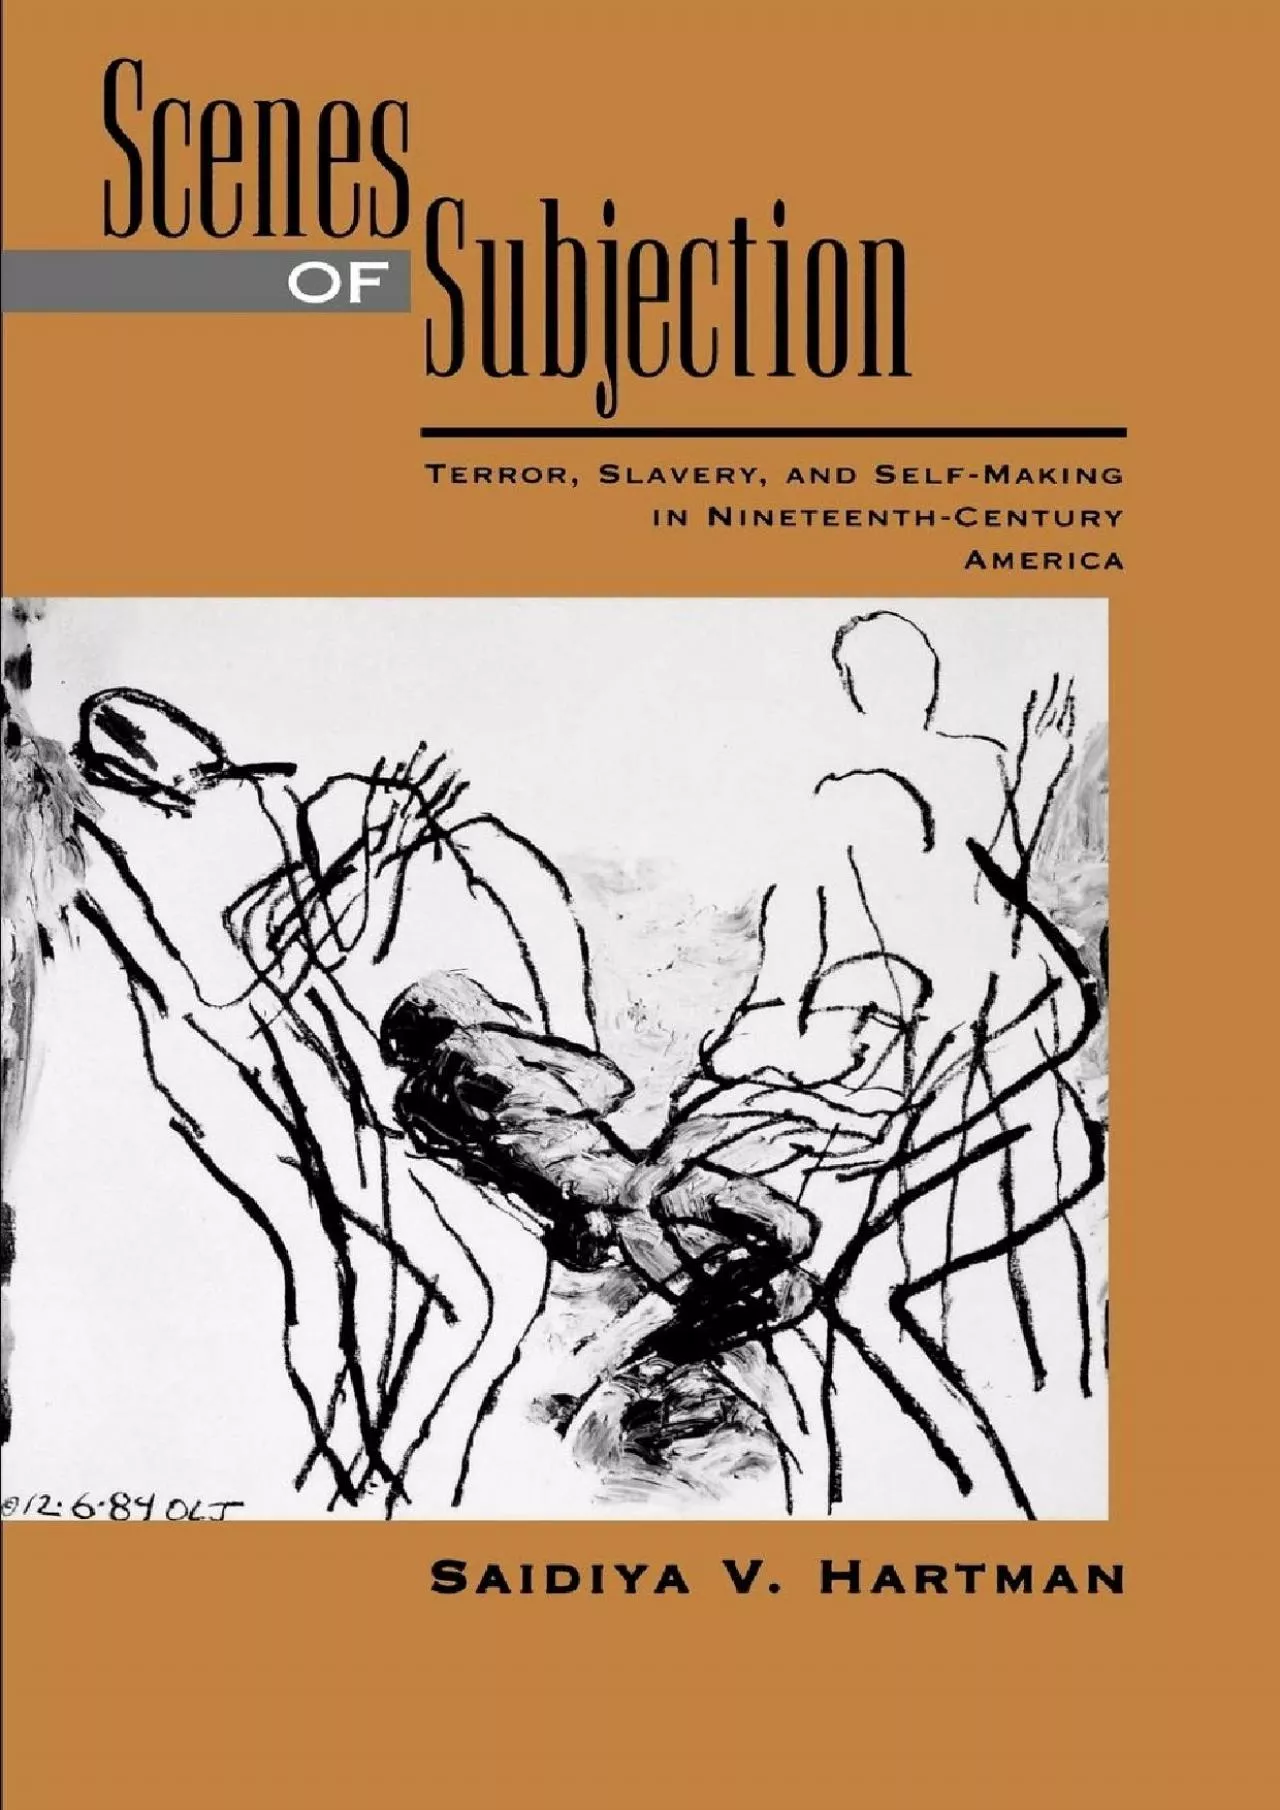 (DOWNLOAD)-Scenes of Subjection: Terror, Slavery, and Self-Making in Nineteenth-Century